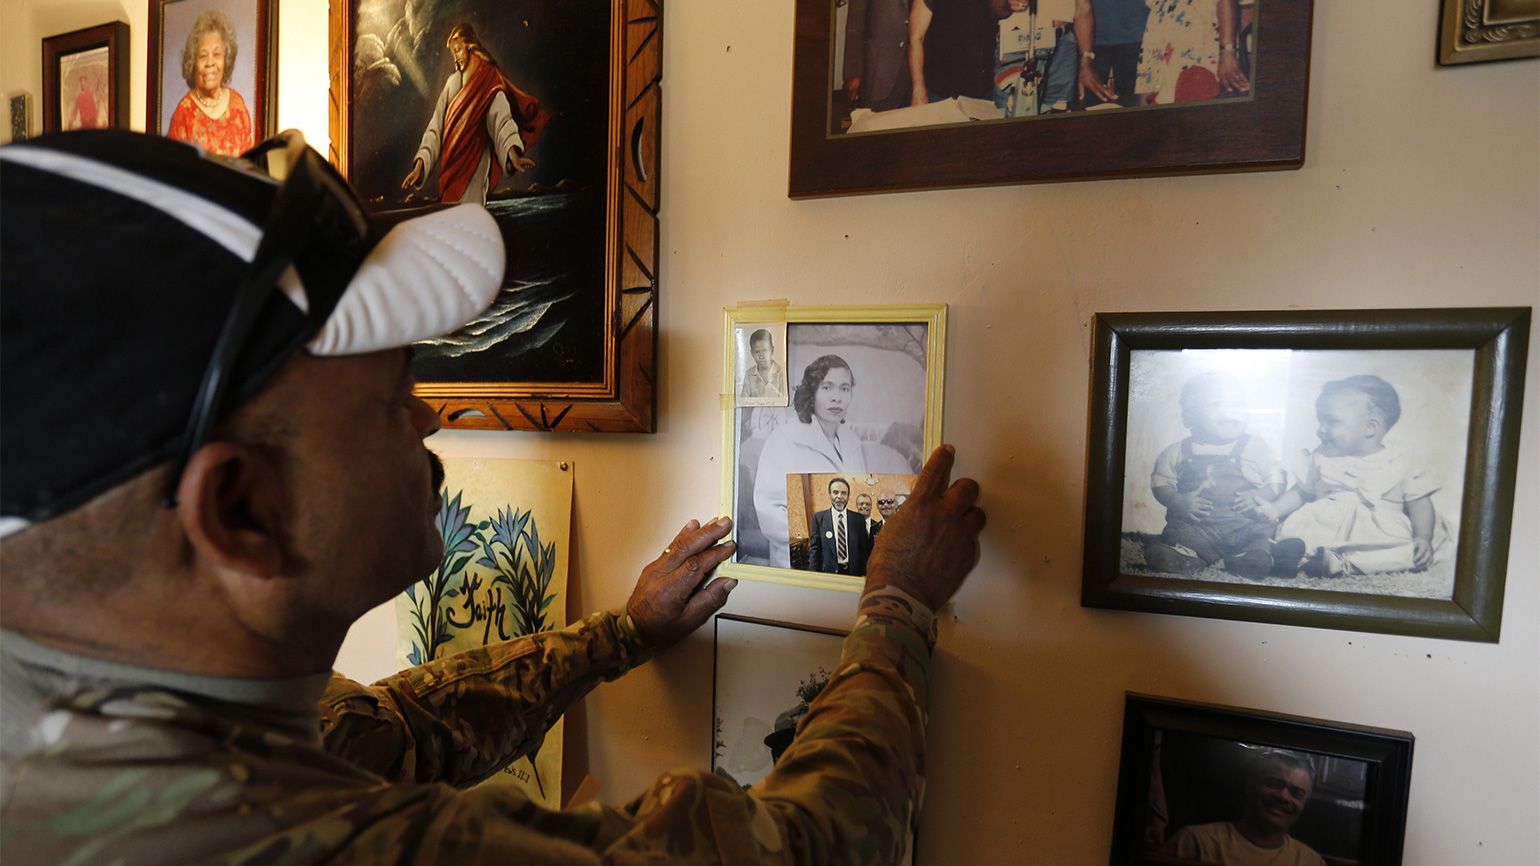 Iraq Veteran's Journey of Healing: Sgt. Powell straightens a photo of his mother on a wall at his brother's house